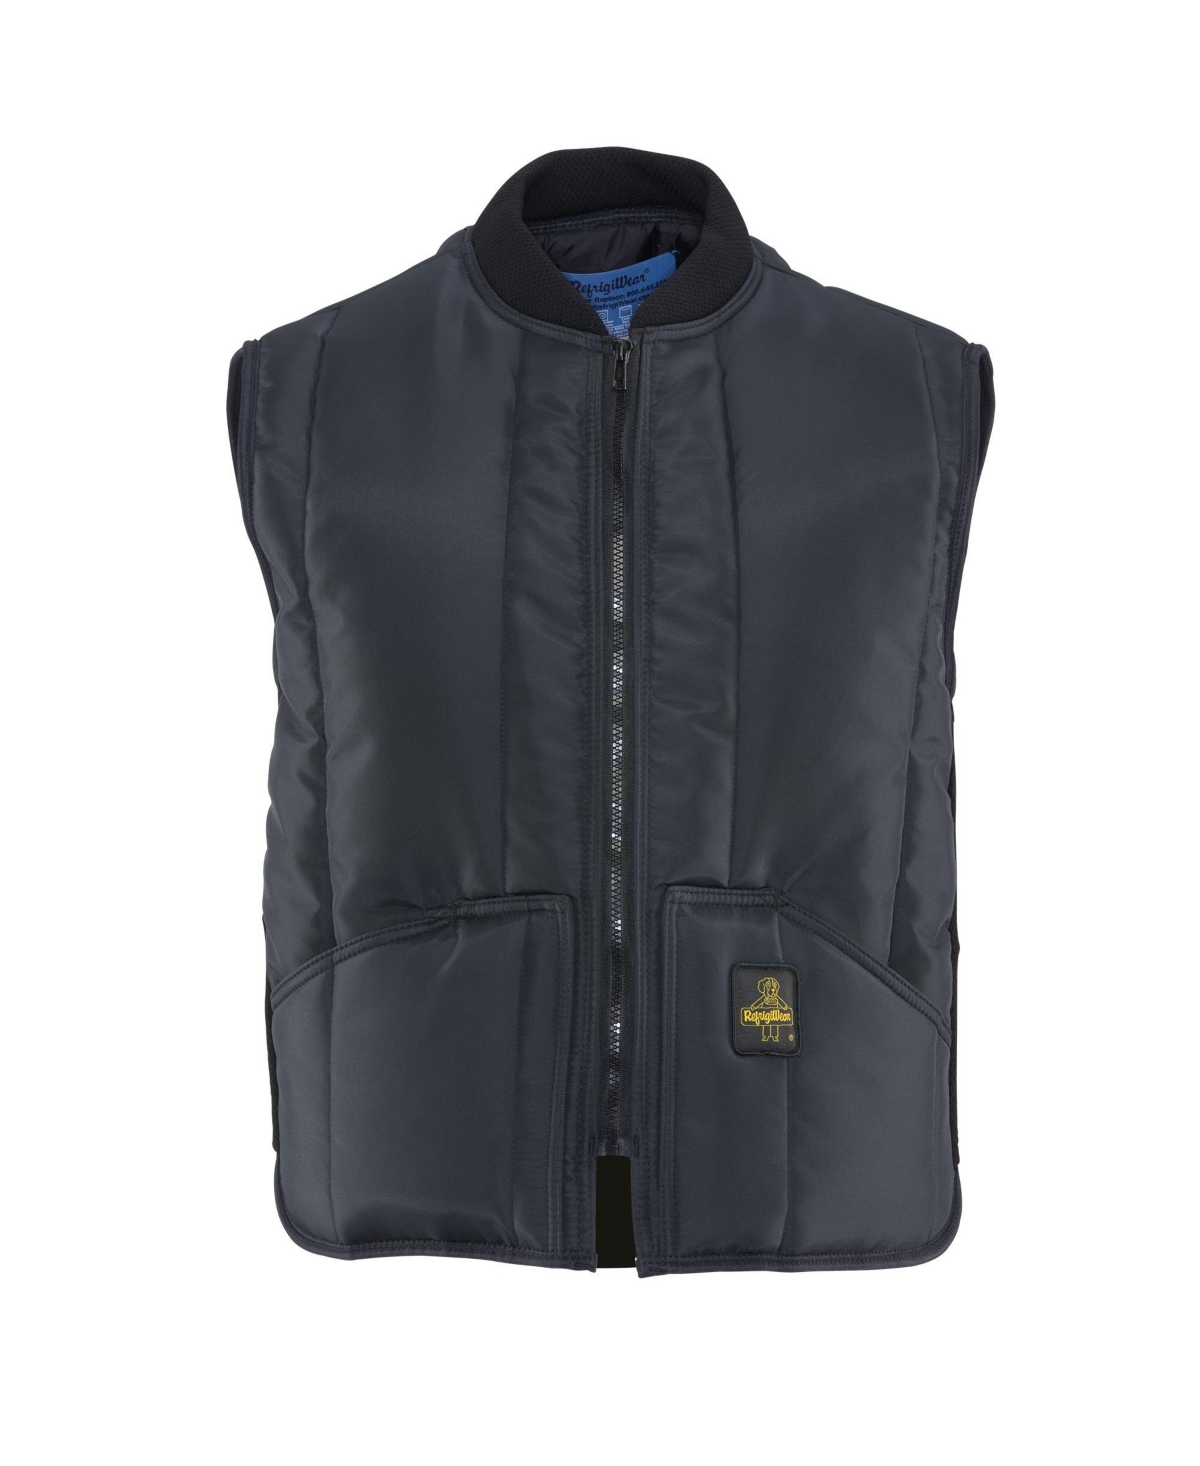 Men's Iron-Tuff Water-Resistant Insulated Vest -50F Cold Protection - Navy